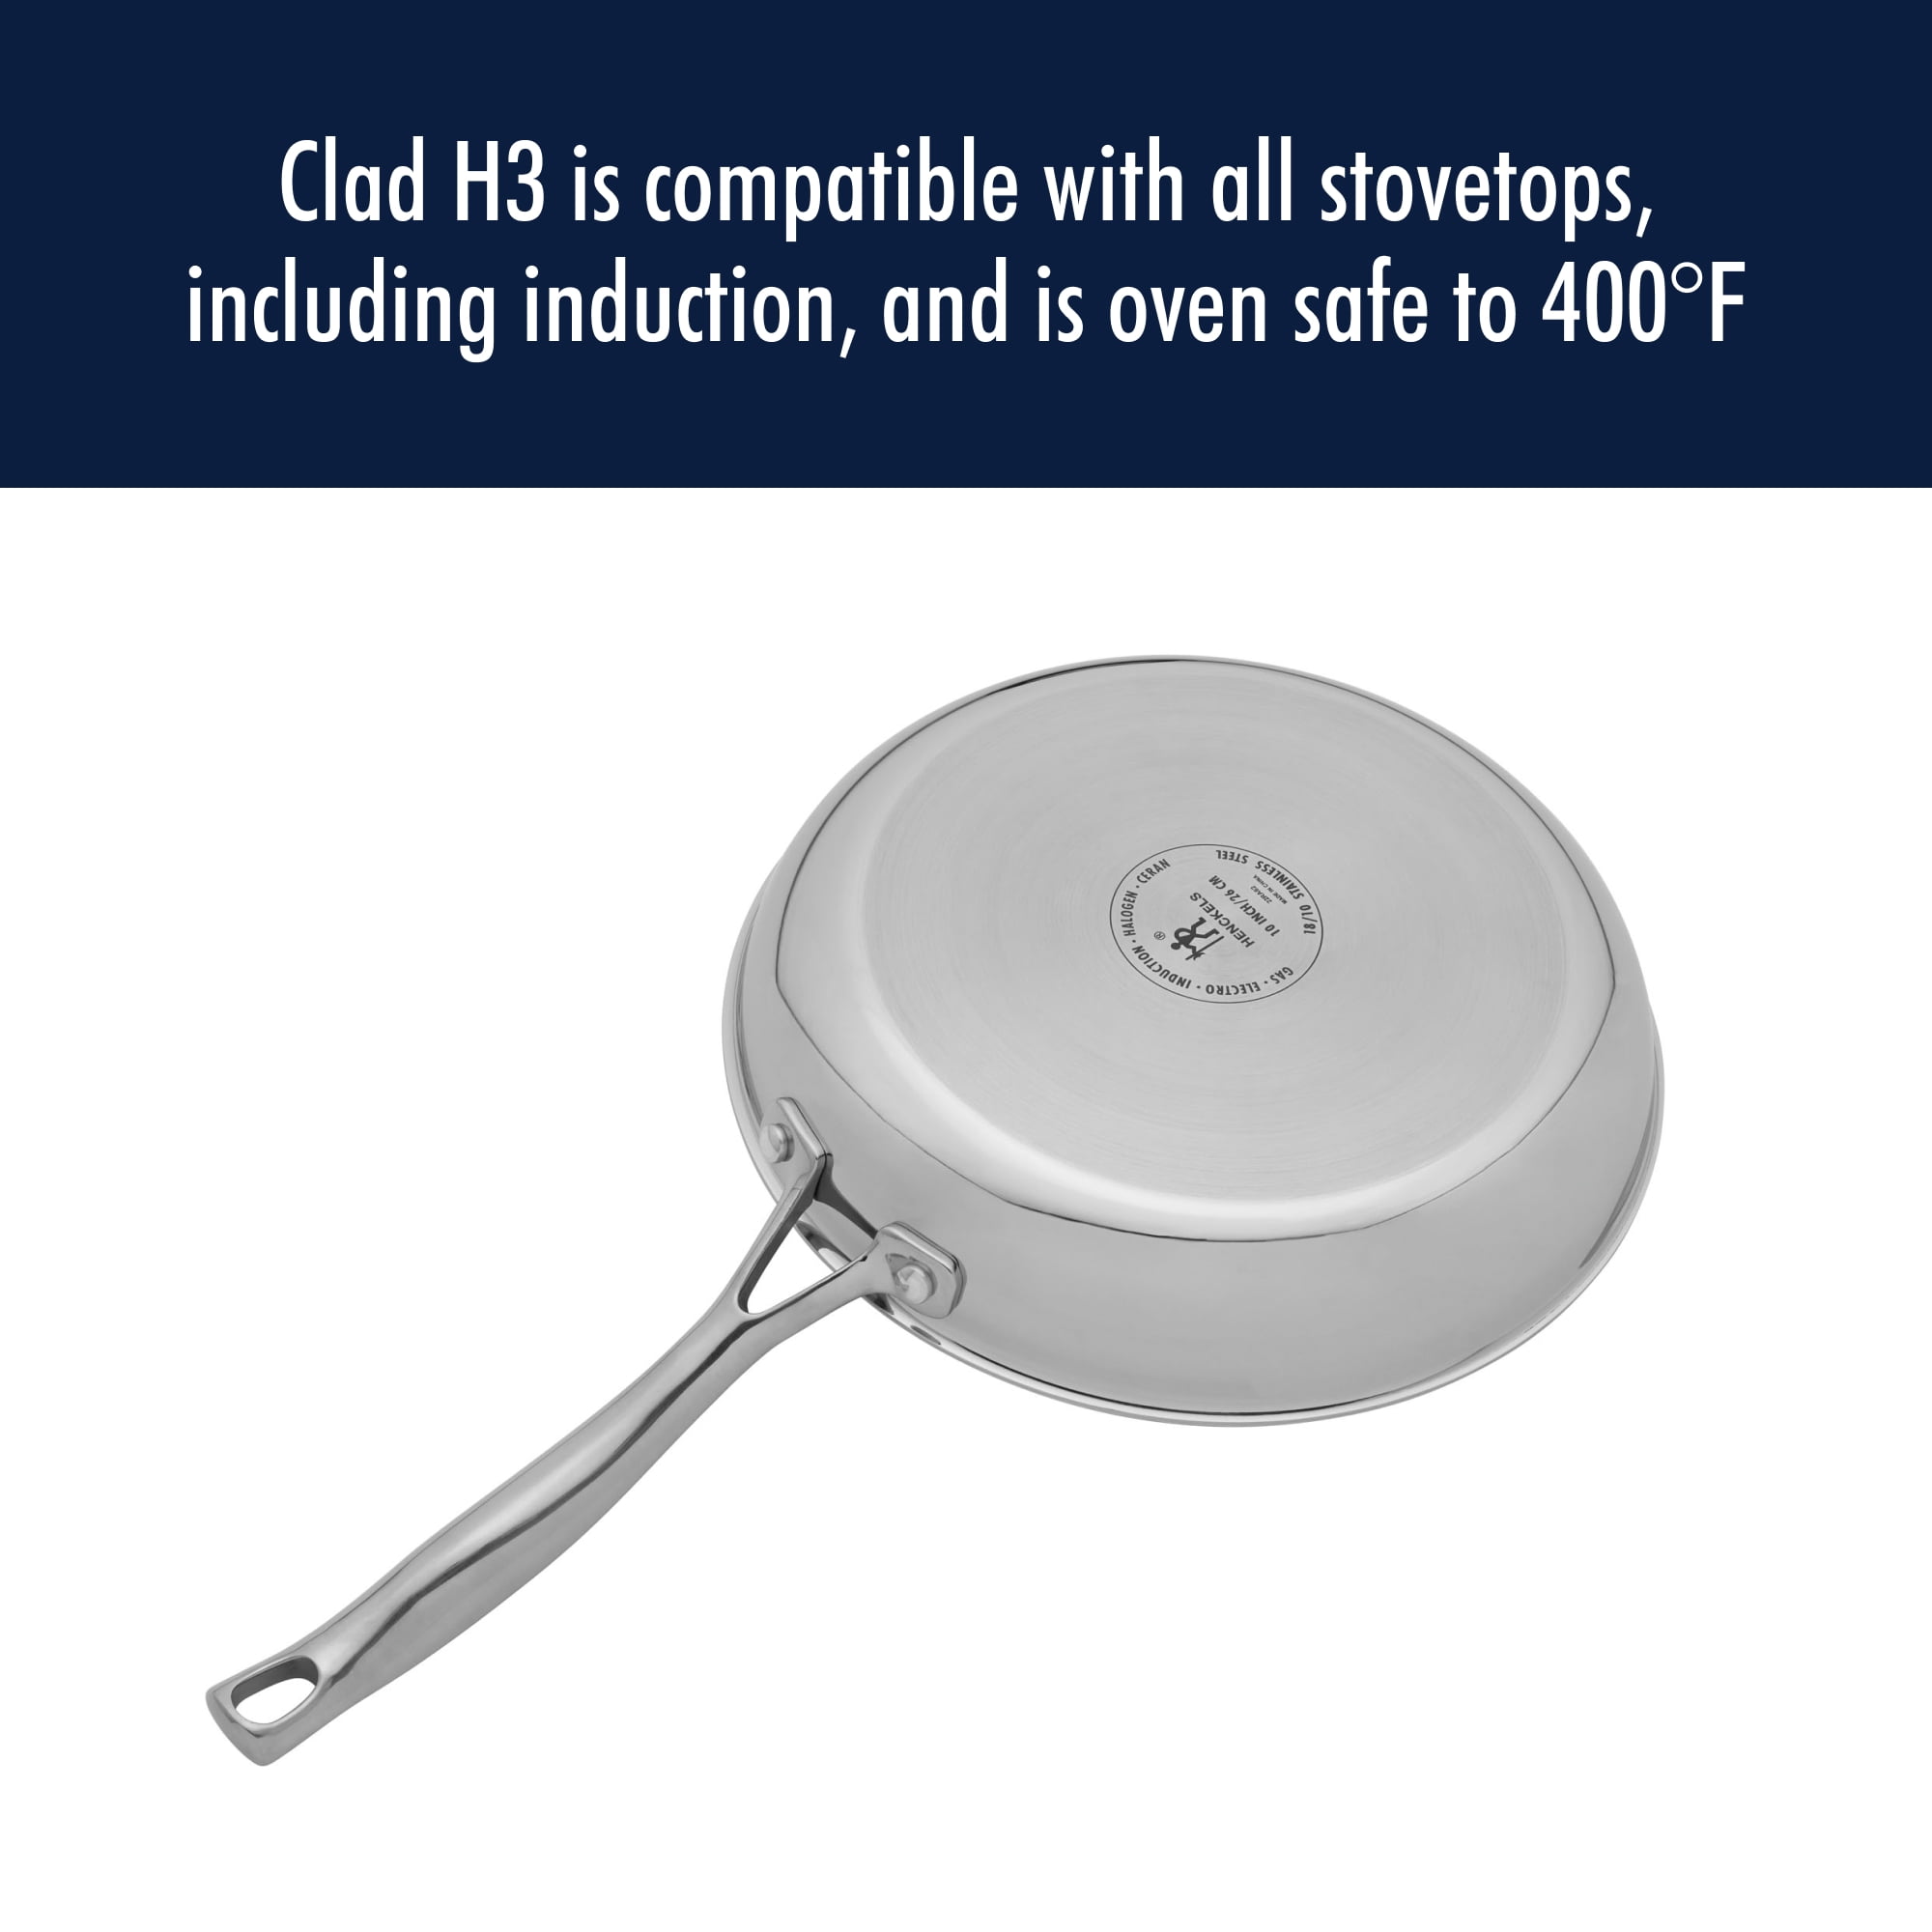 HENCKELS Clad H3 10-inch Induction Frying Pan with Lid, Stainless Steel,  Durable and Easy to clean